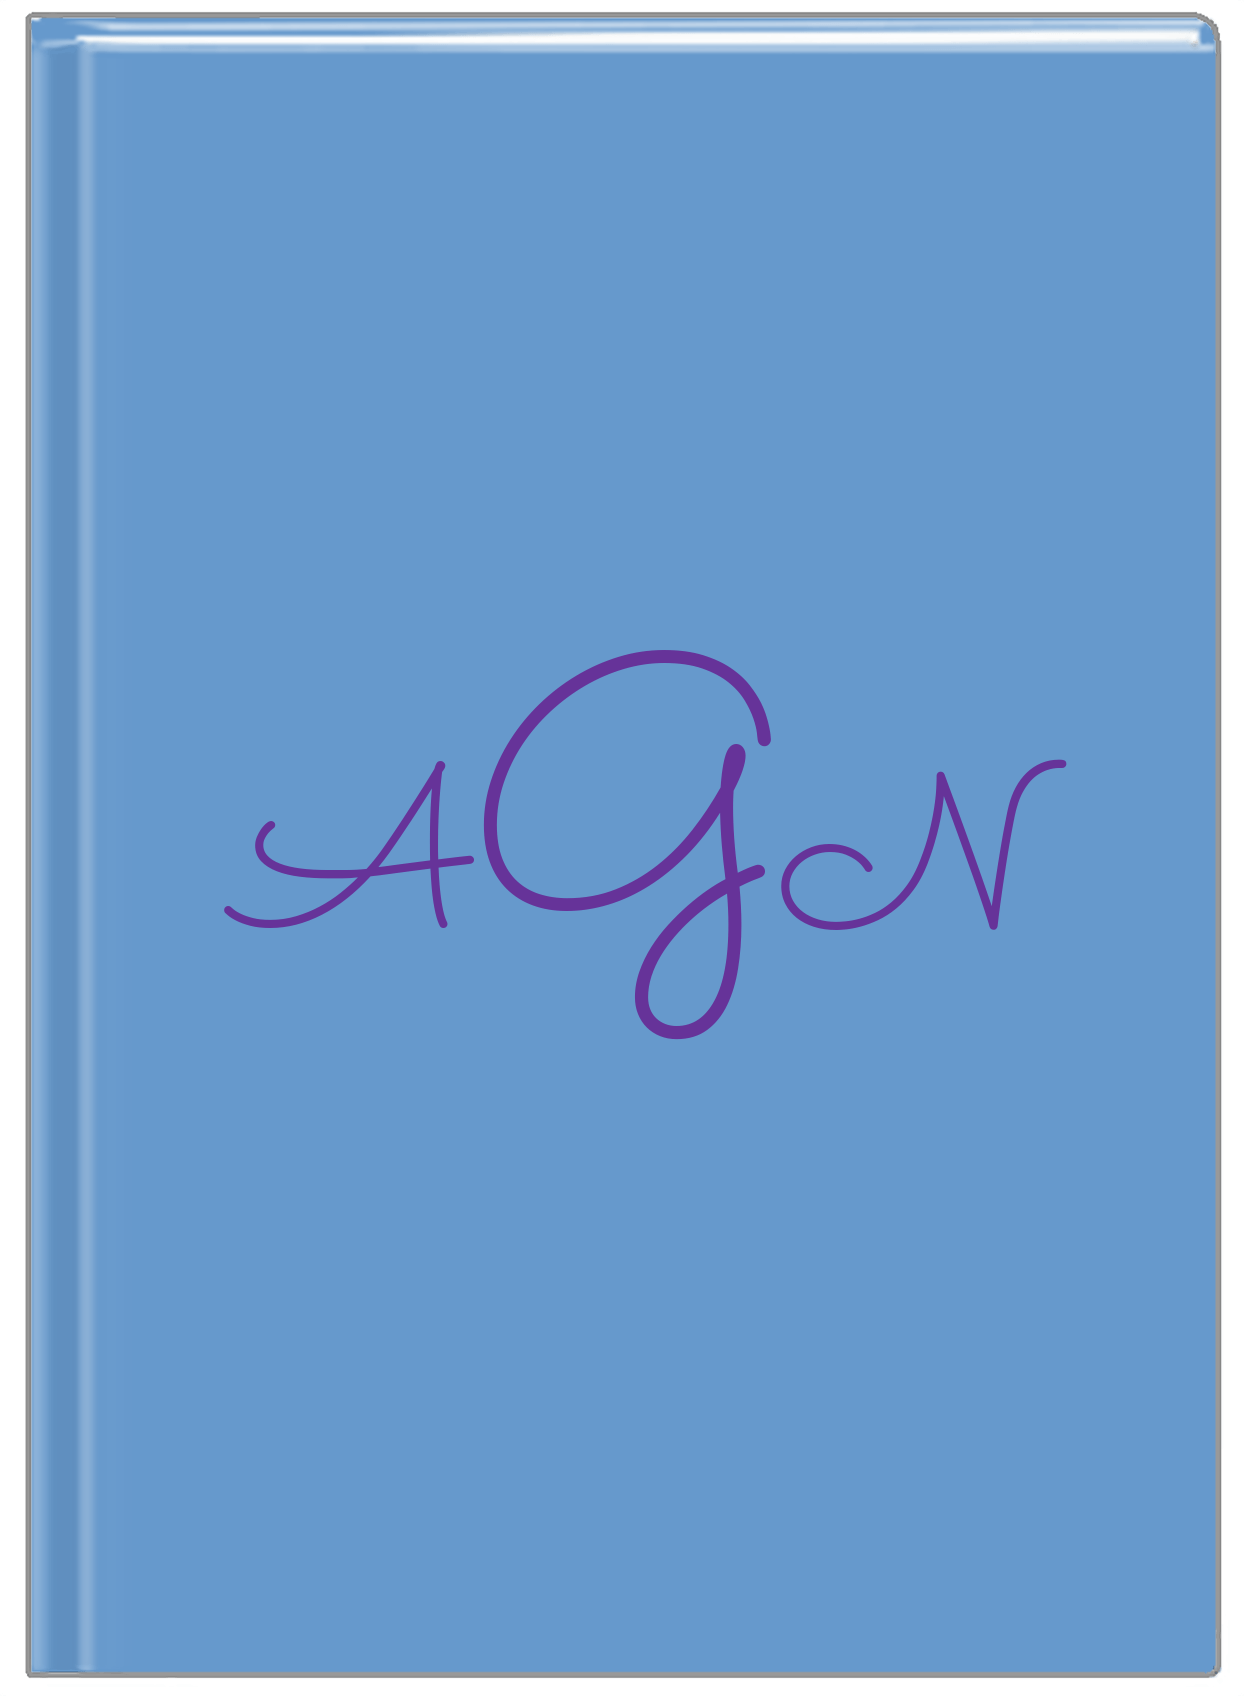 Personalized Solid Color Journal - Blue Background - Monogram - Front View